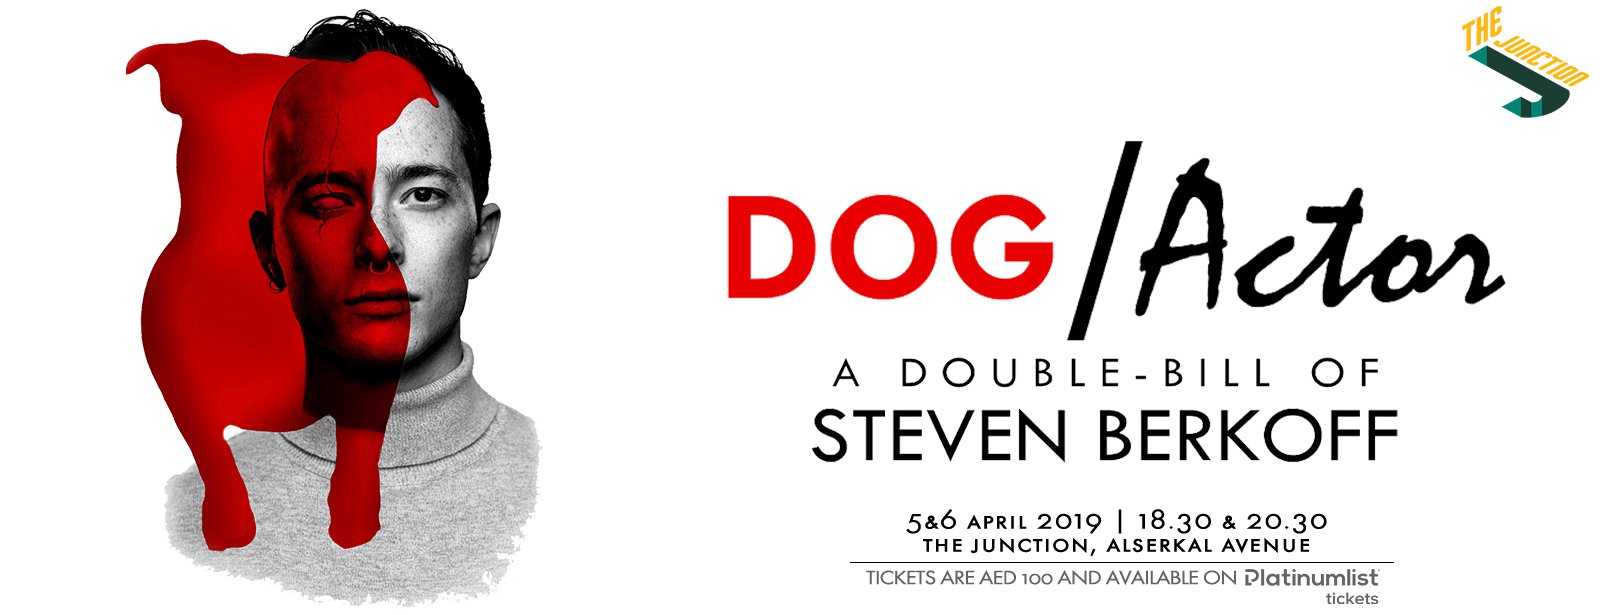 Dog/Actor at The Junction - Coming Soon in UAE